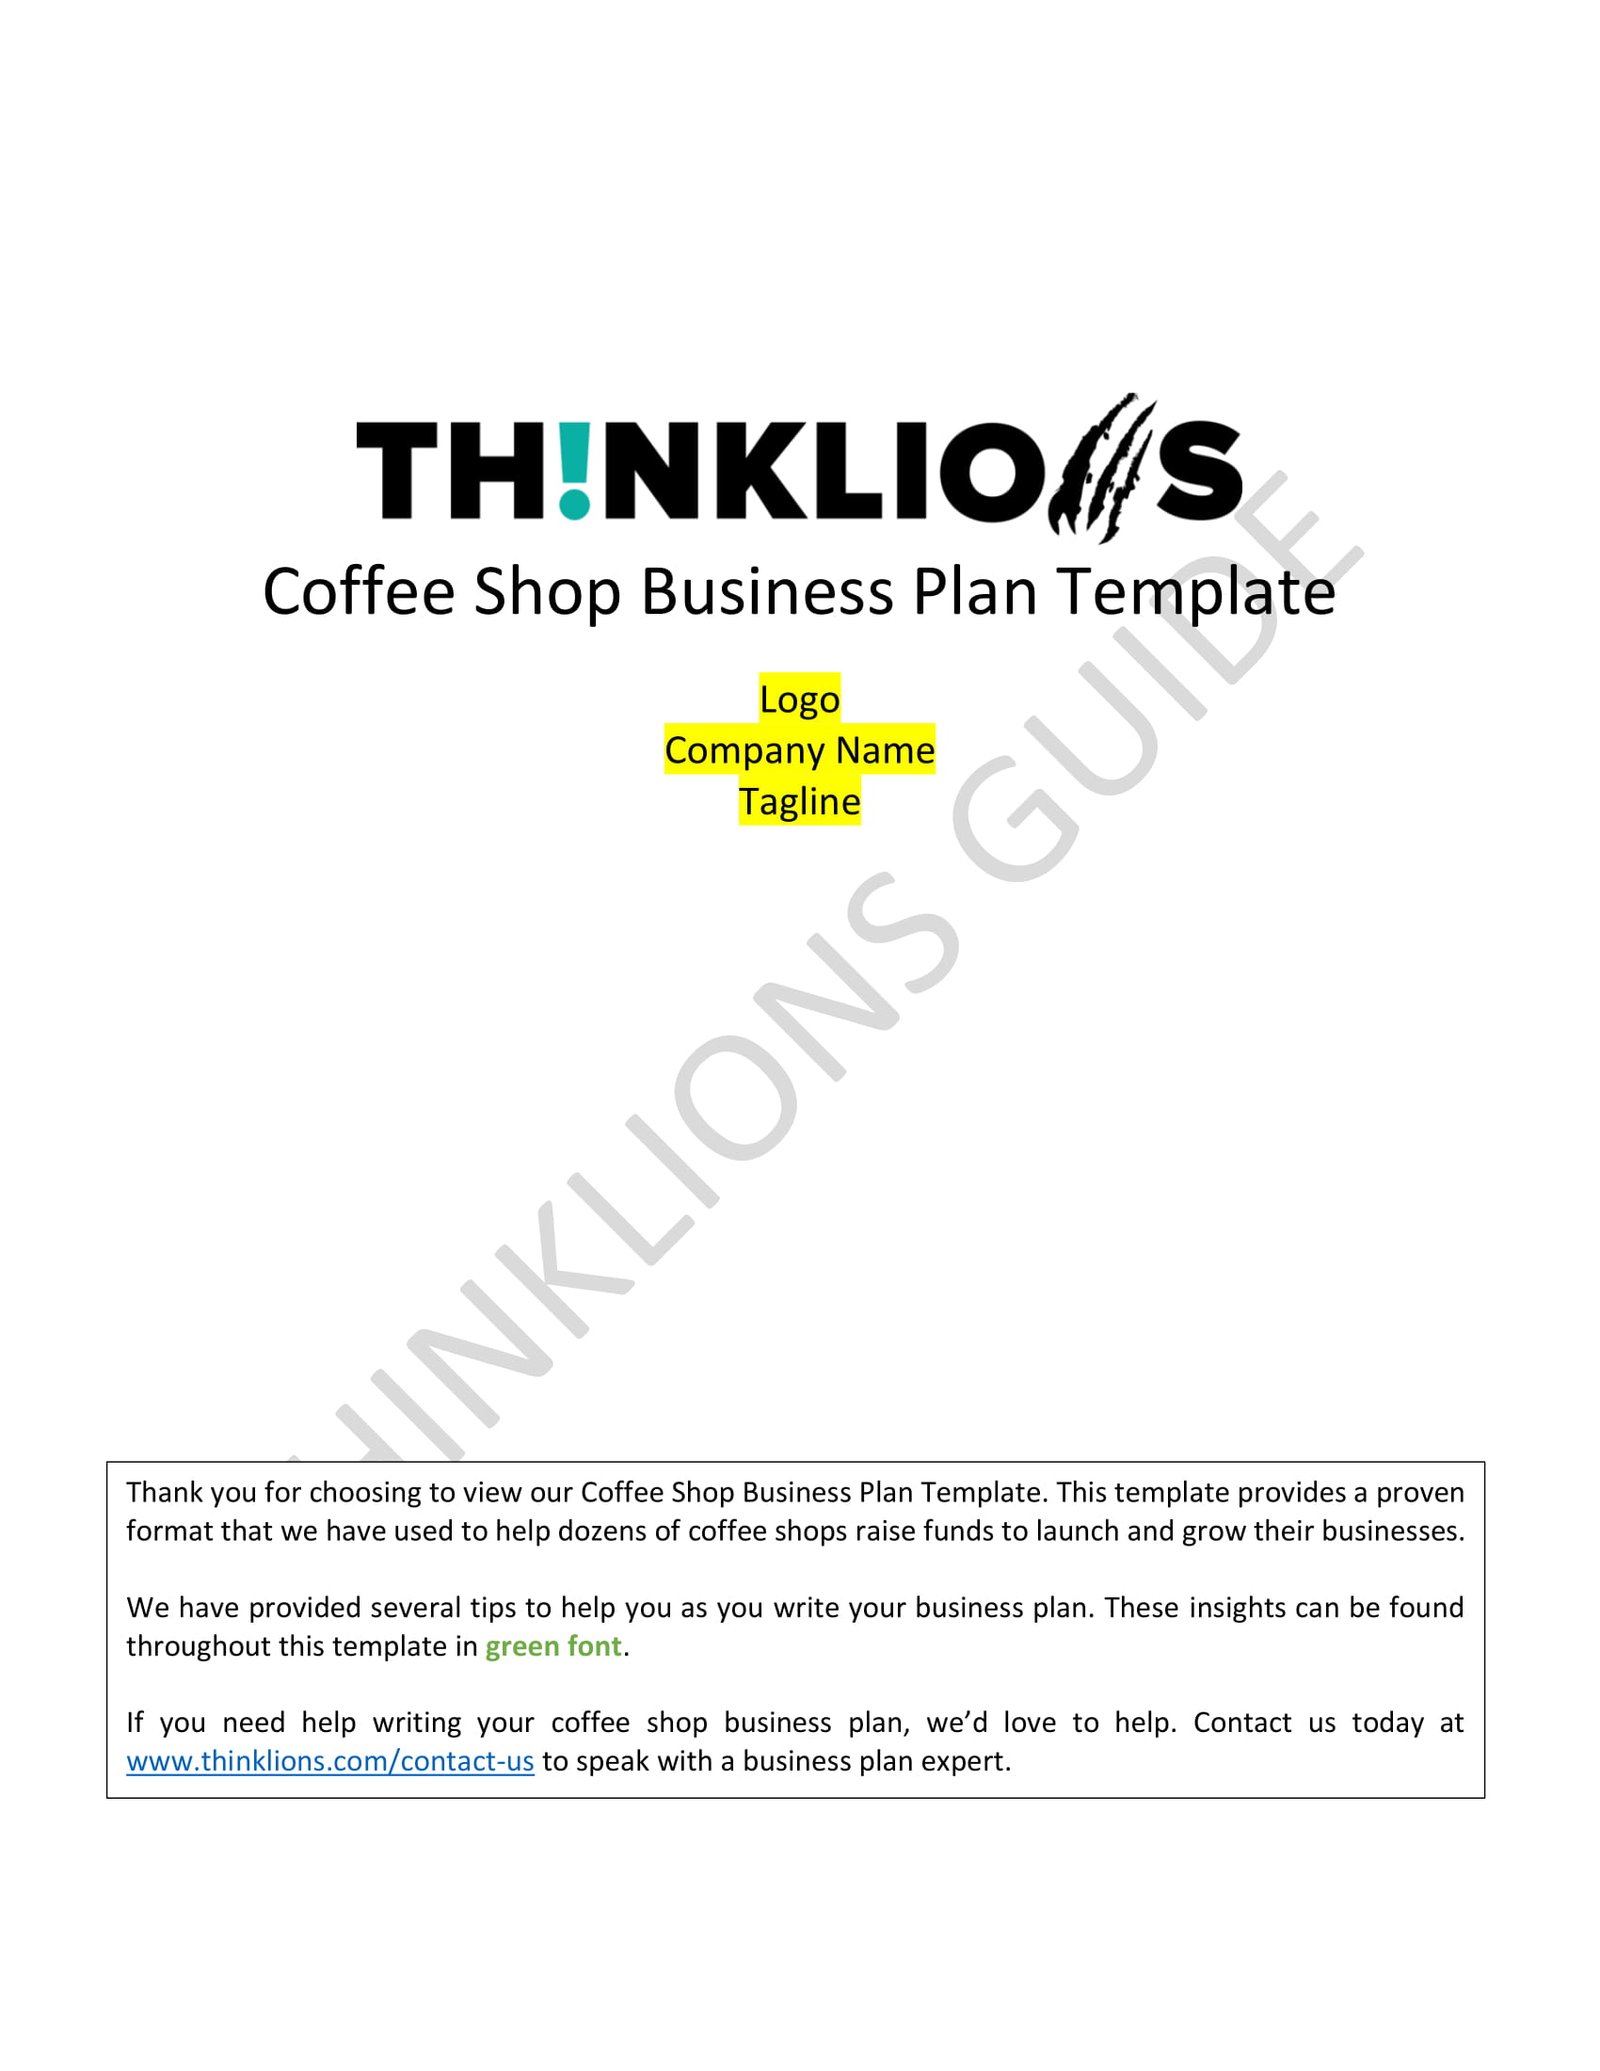 cover page of a coffee shop business plan